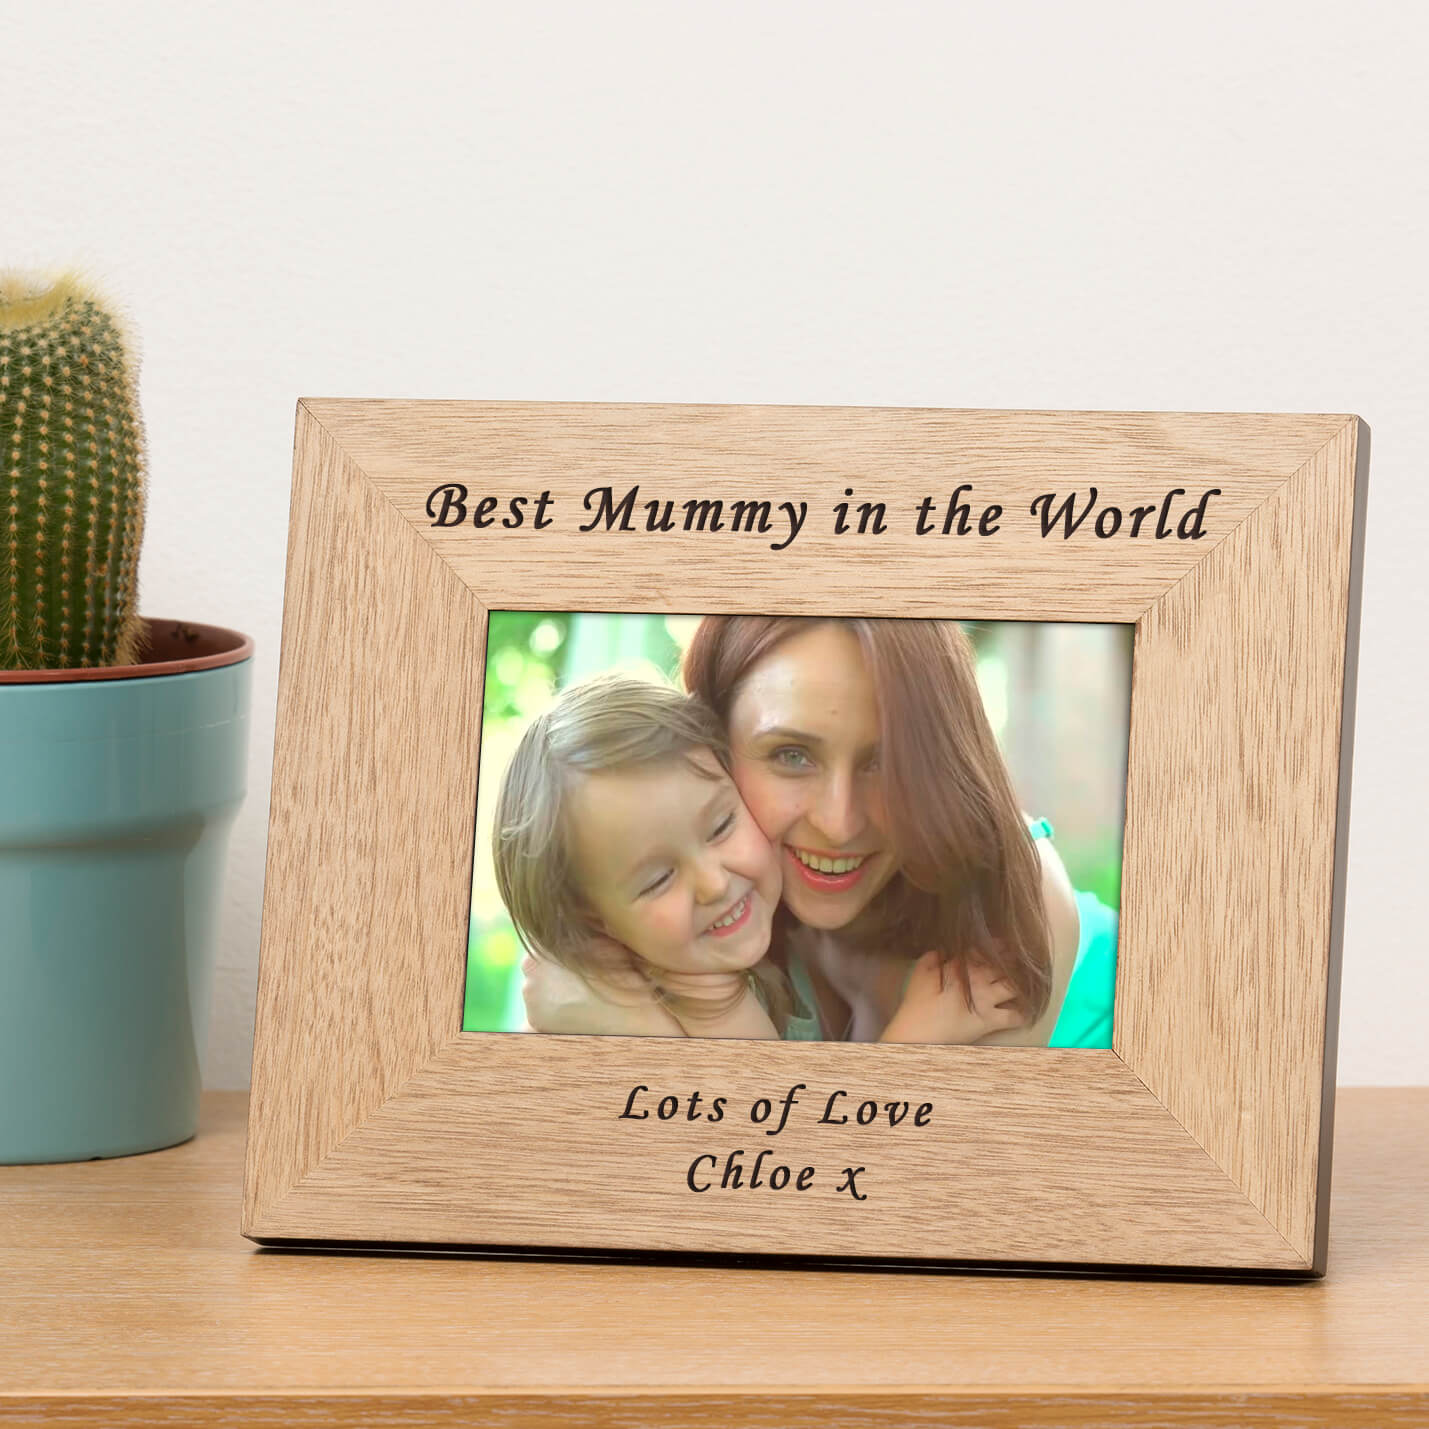 Personalised Wooden Photo Frame – Best Mummy